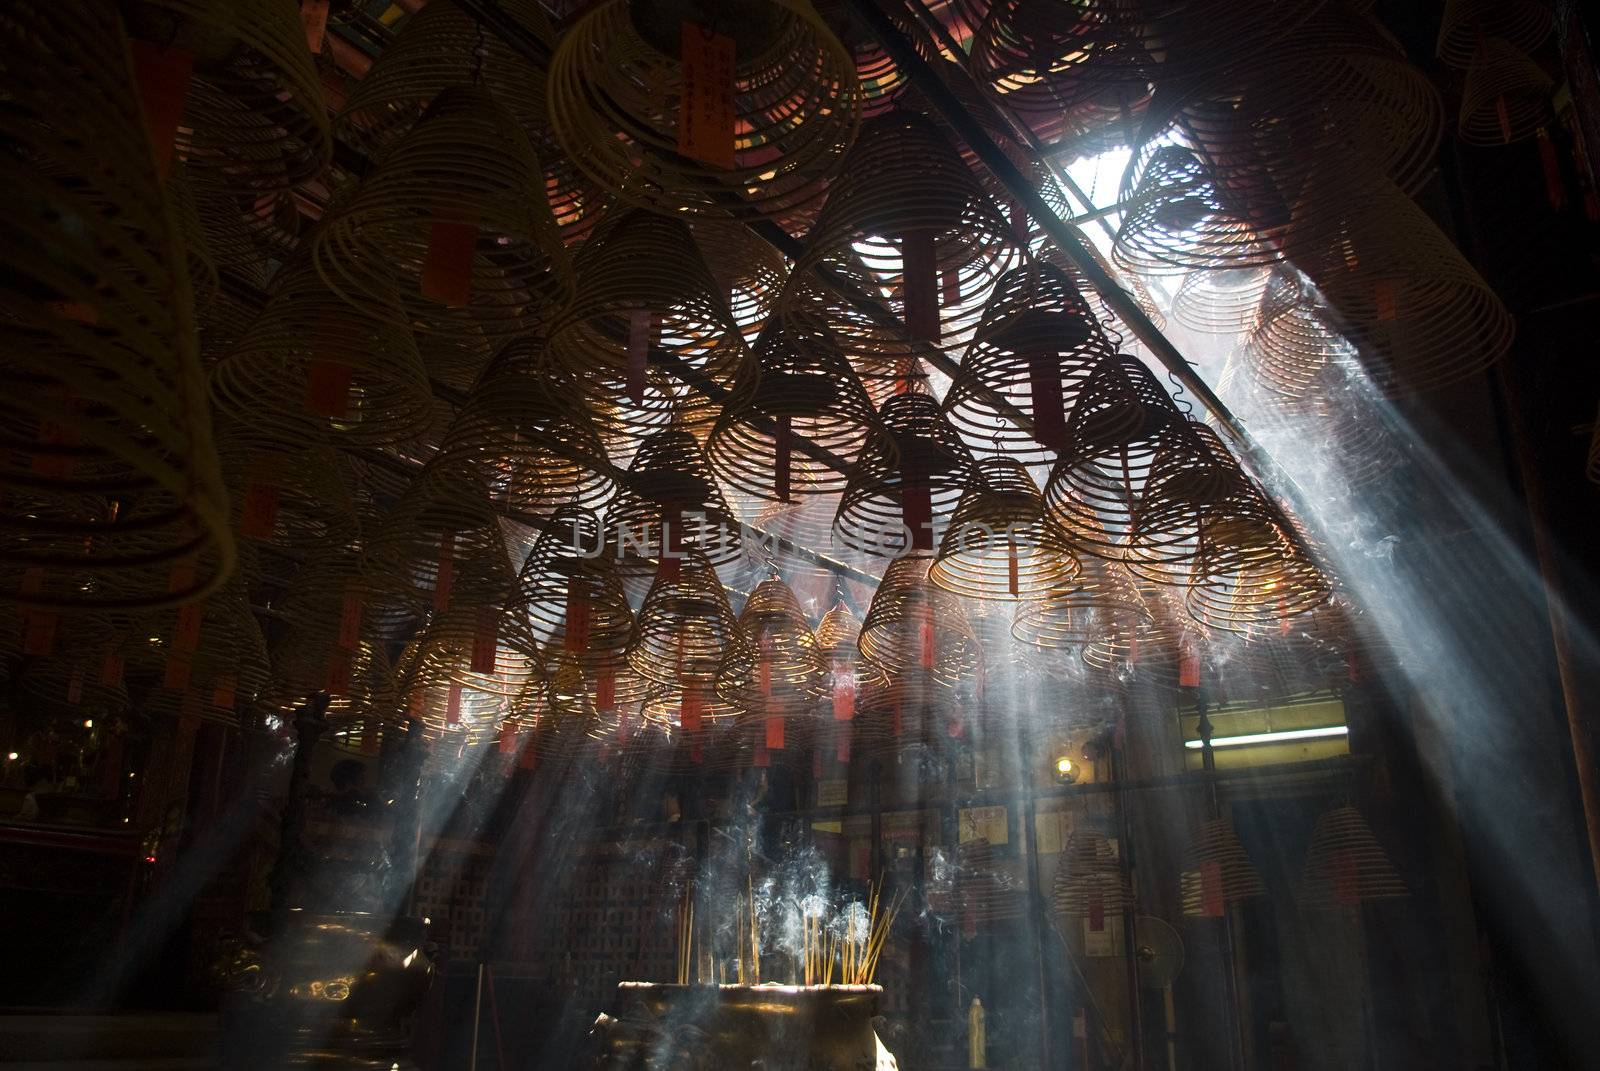 Incense and crepuscular rays in Hong Kong Man mo temple.
